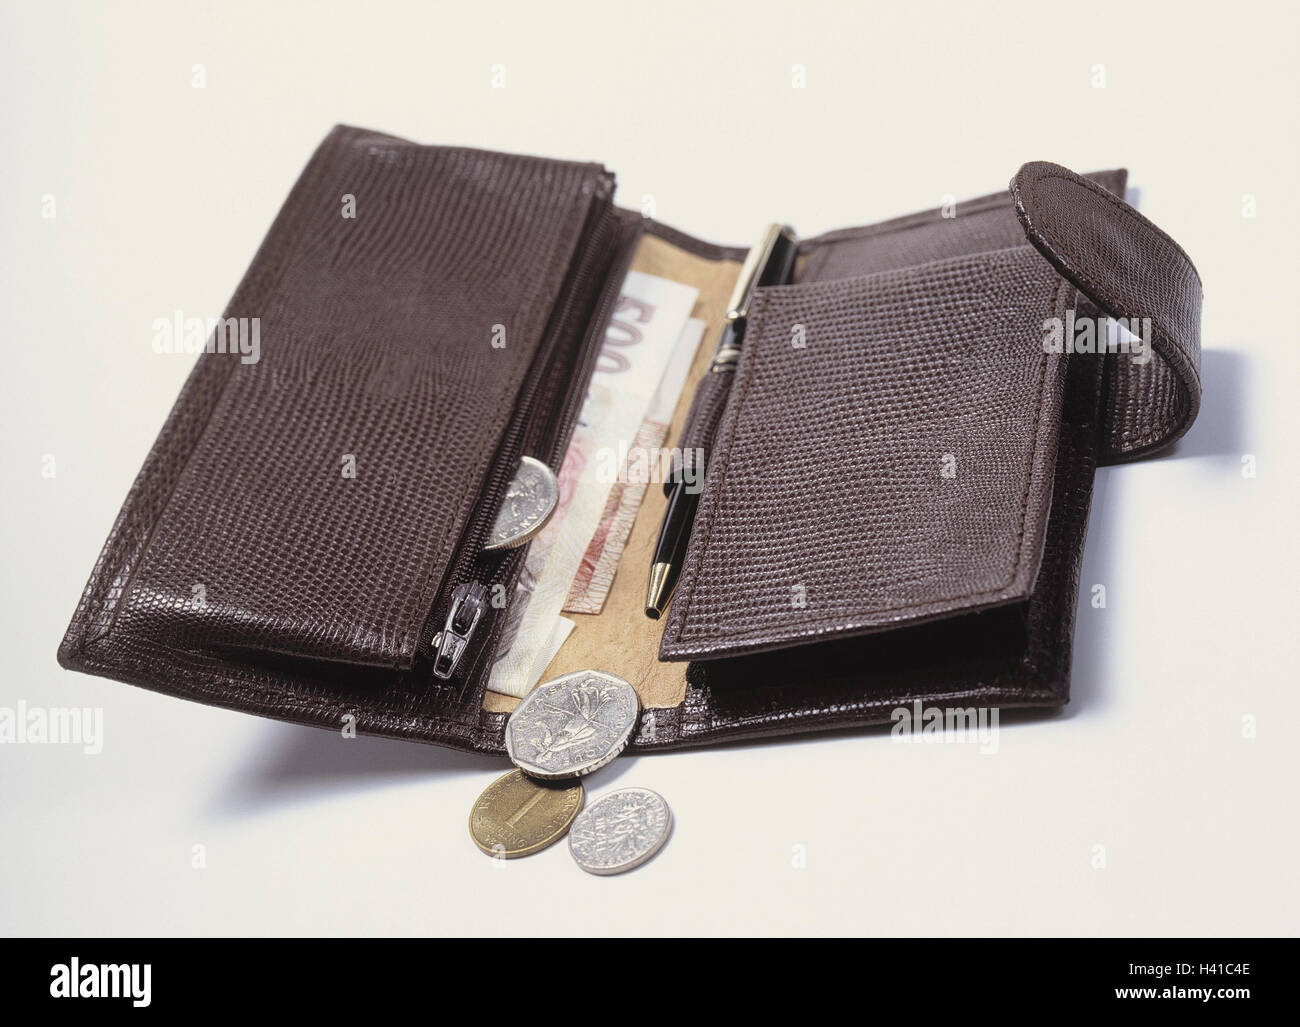 Change purse, bank notes, coins, Still life, product photography, money, change, hard money, banknotes, notes, meanses payment, purses, Portmonee Stock Photo